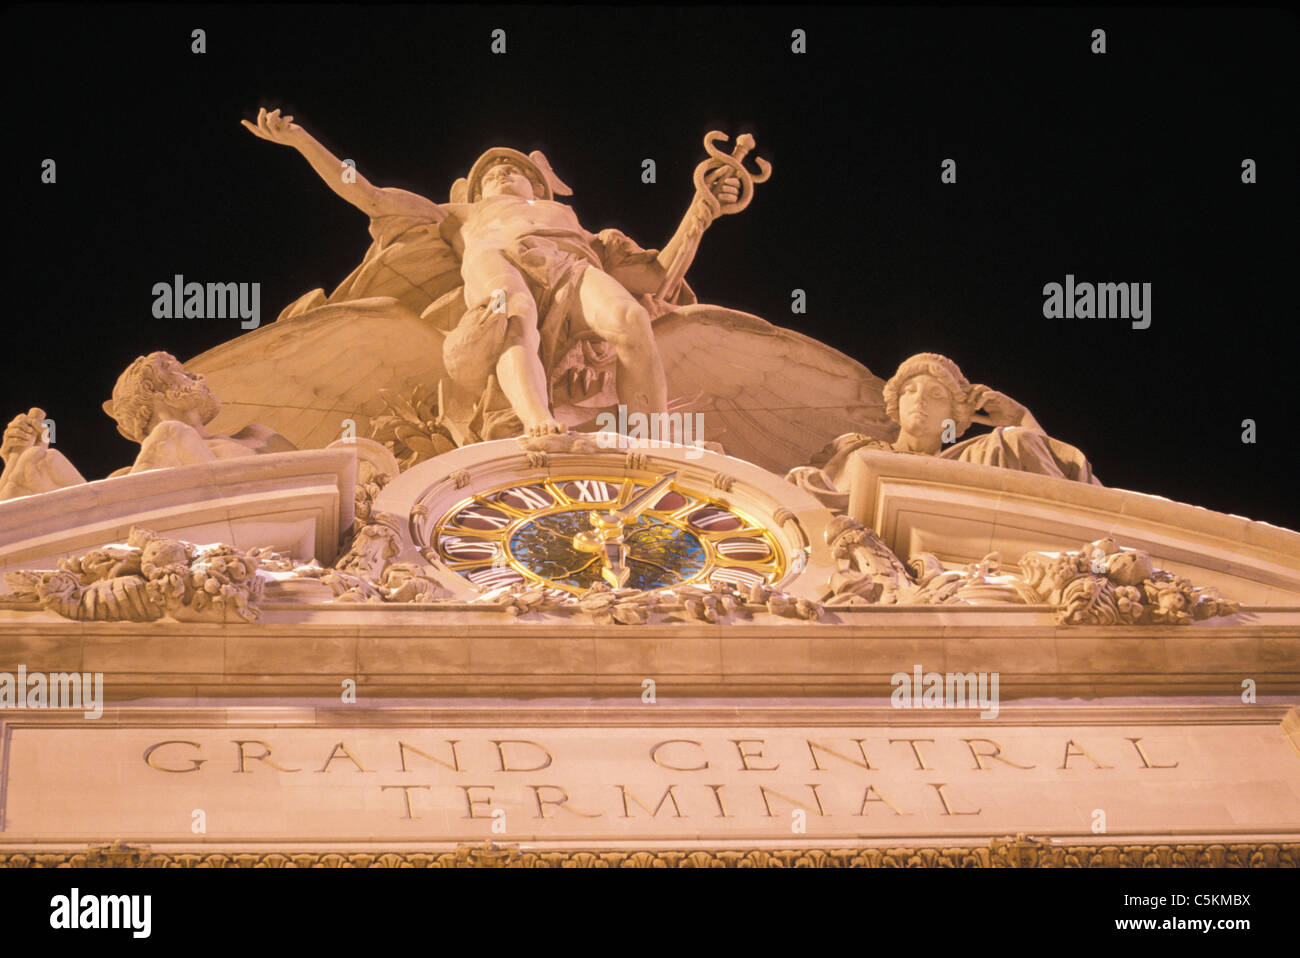 Grand central clock, NYC Stock Photo